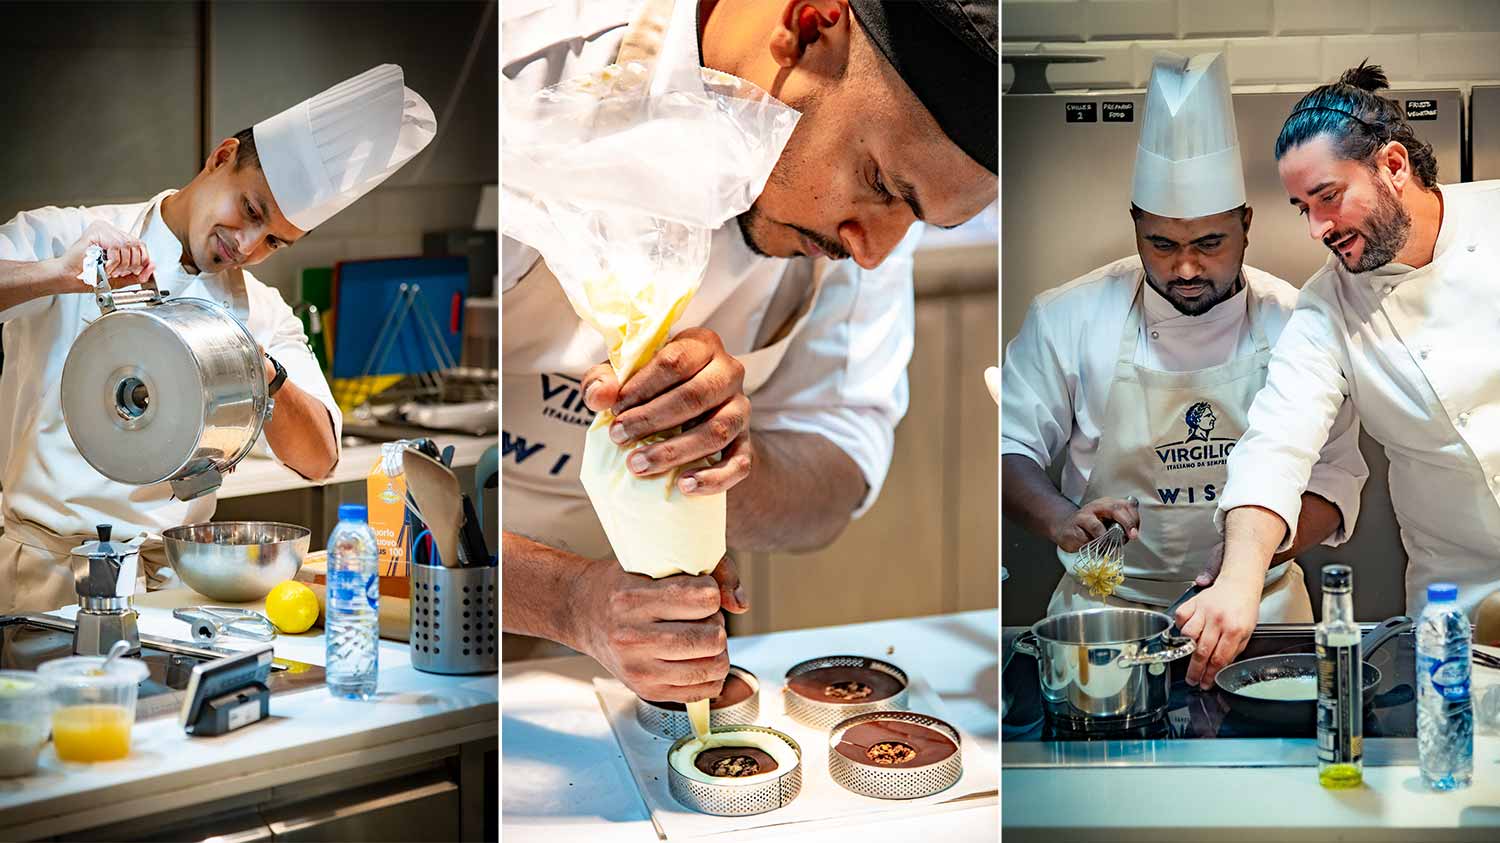 Virgilio_Competition_by_WISK_Dubai_Chefs_and_Judges_Desserts.jpg